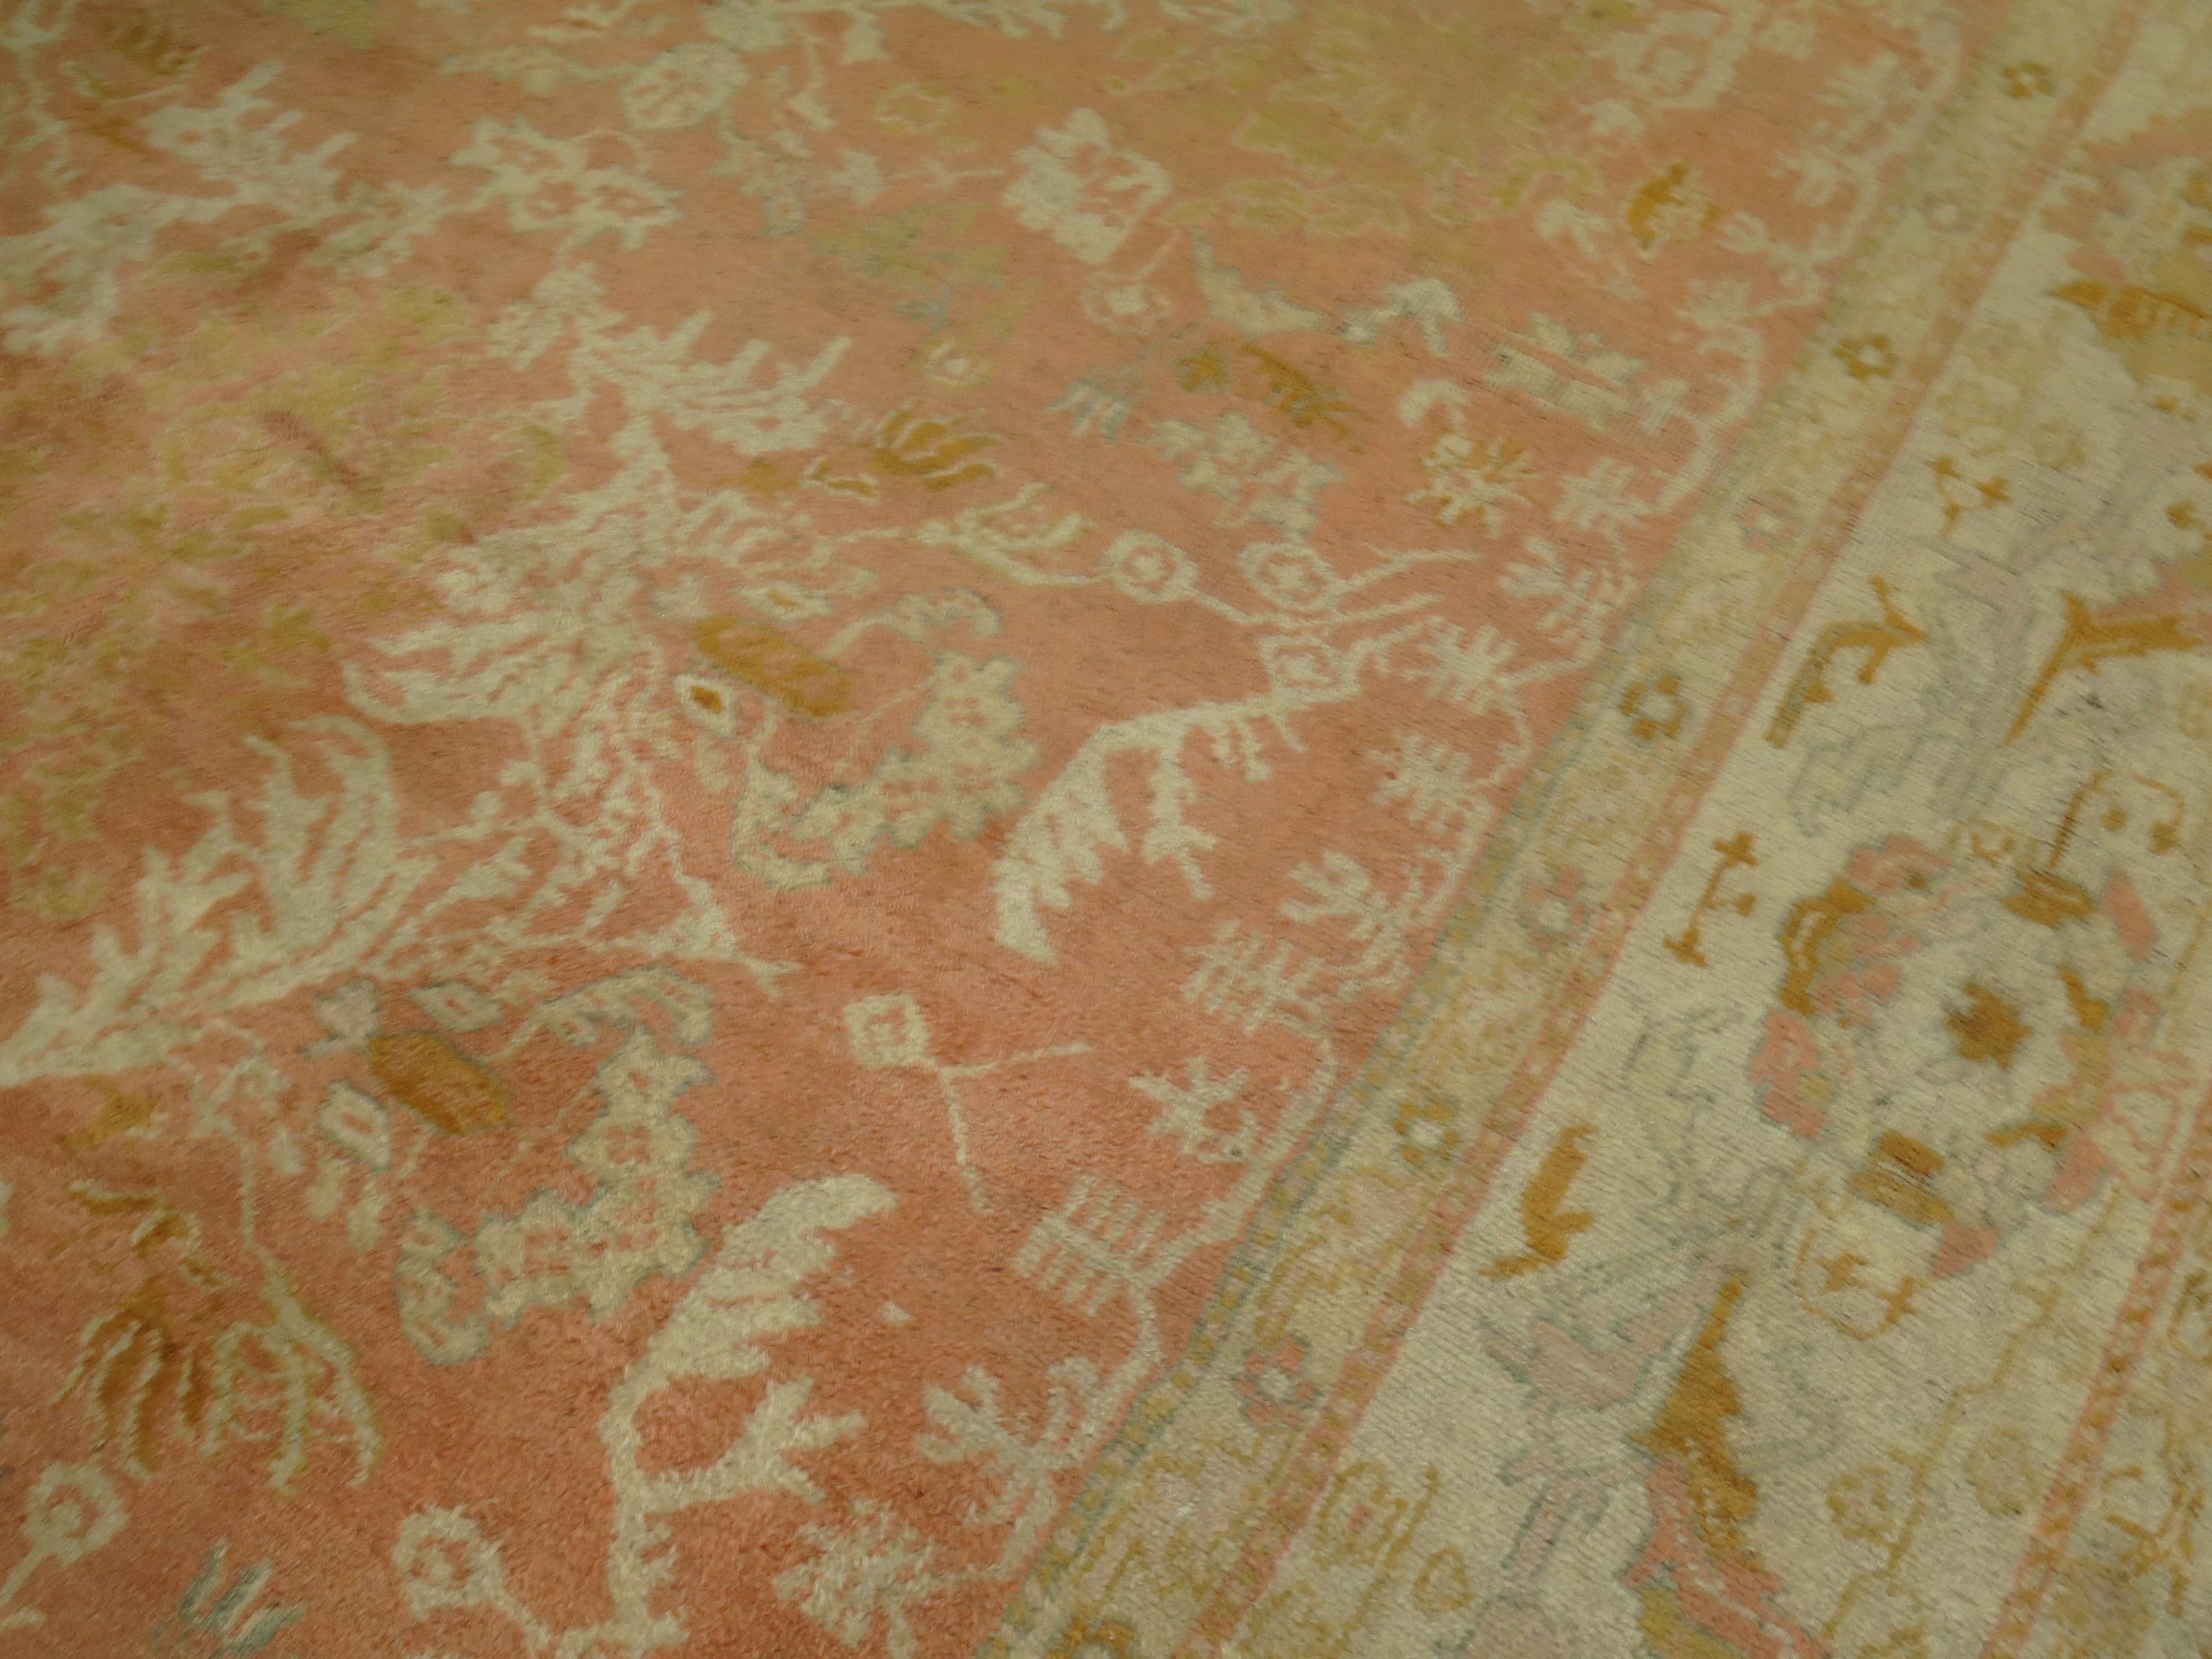 Phenomenal large size handmade Turkish Oushak in peach and cream with a traditional formal design.

Measures: 11'4” x 15'3”

Oushak rugs originated in the small town of Oushak in west-central Anatolia, today just south of Istanbul, Turkey.